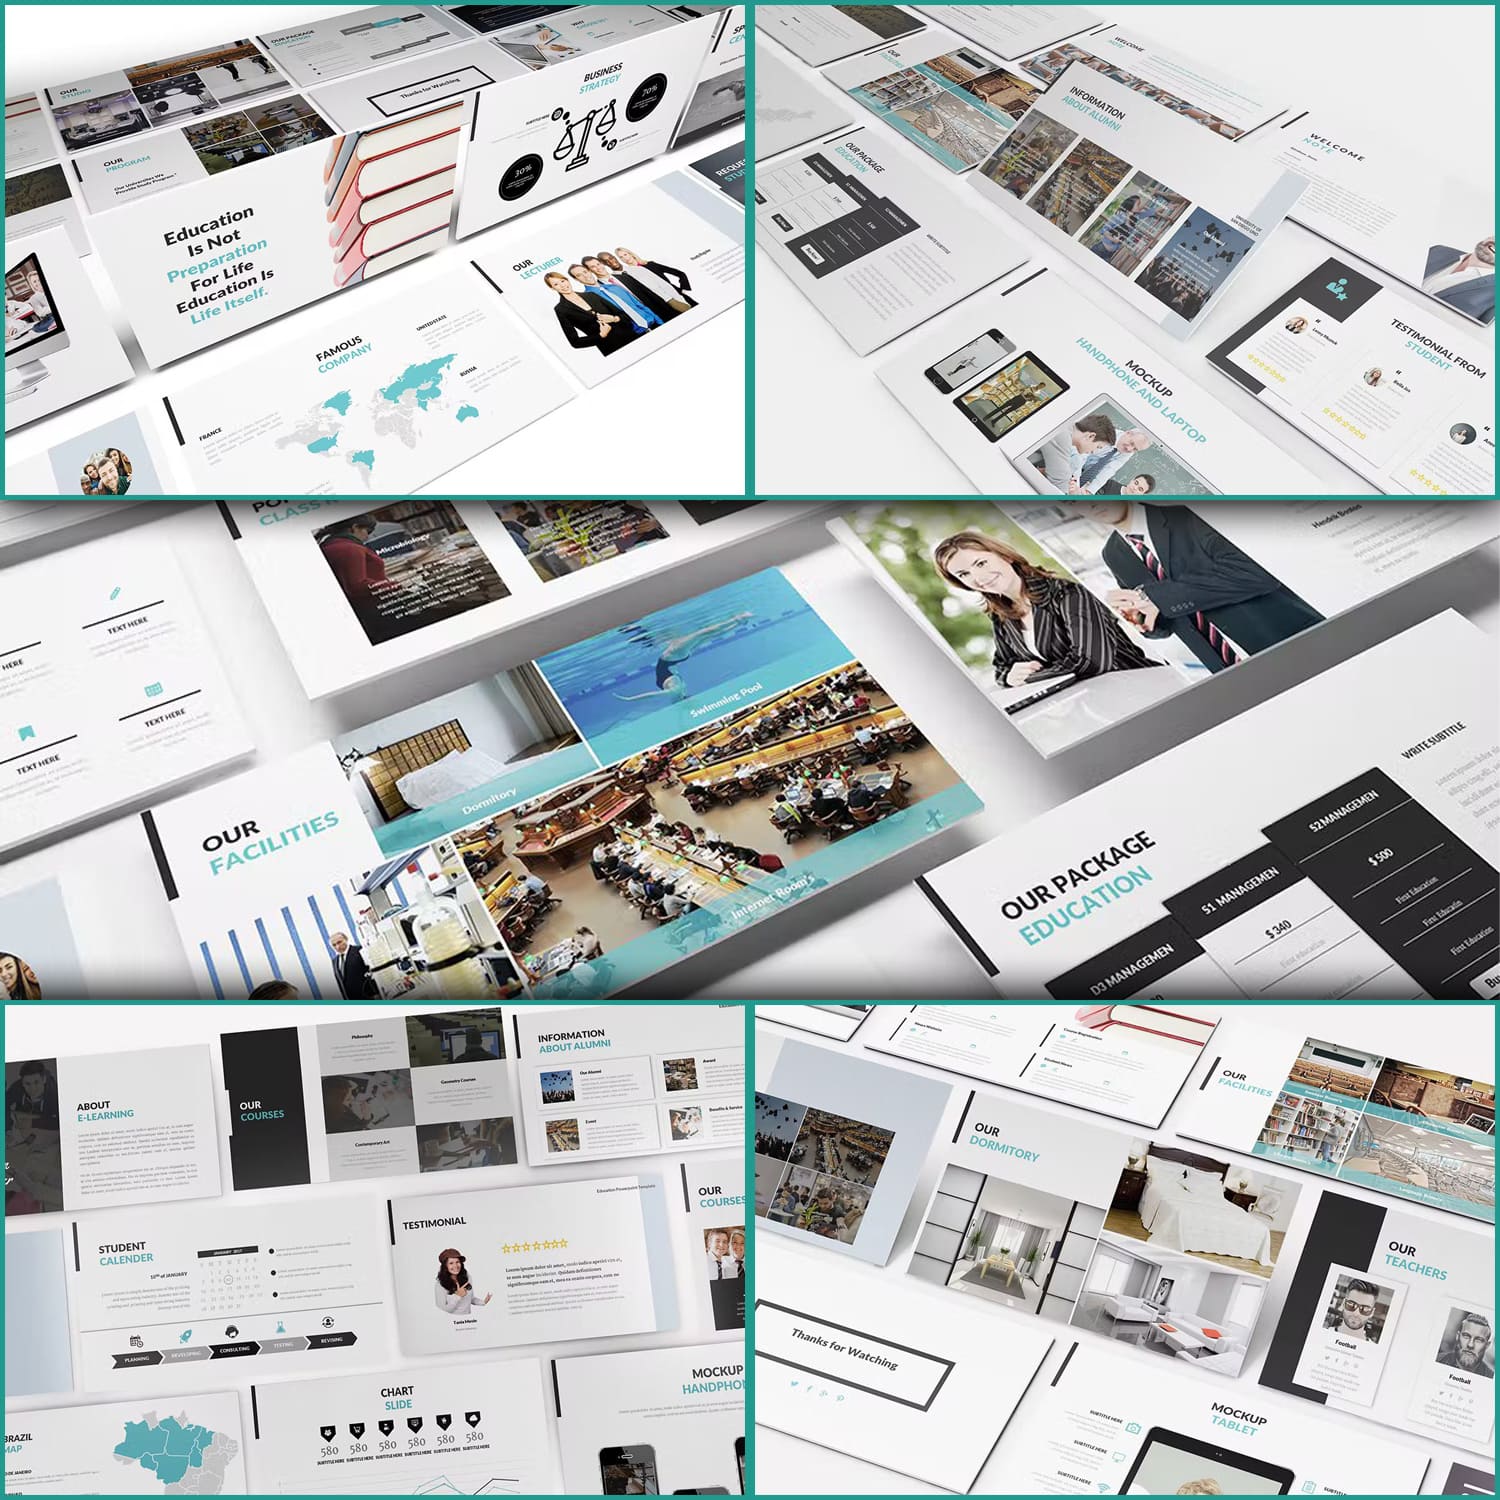 Facilities of University and education powerpoint template.